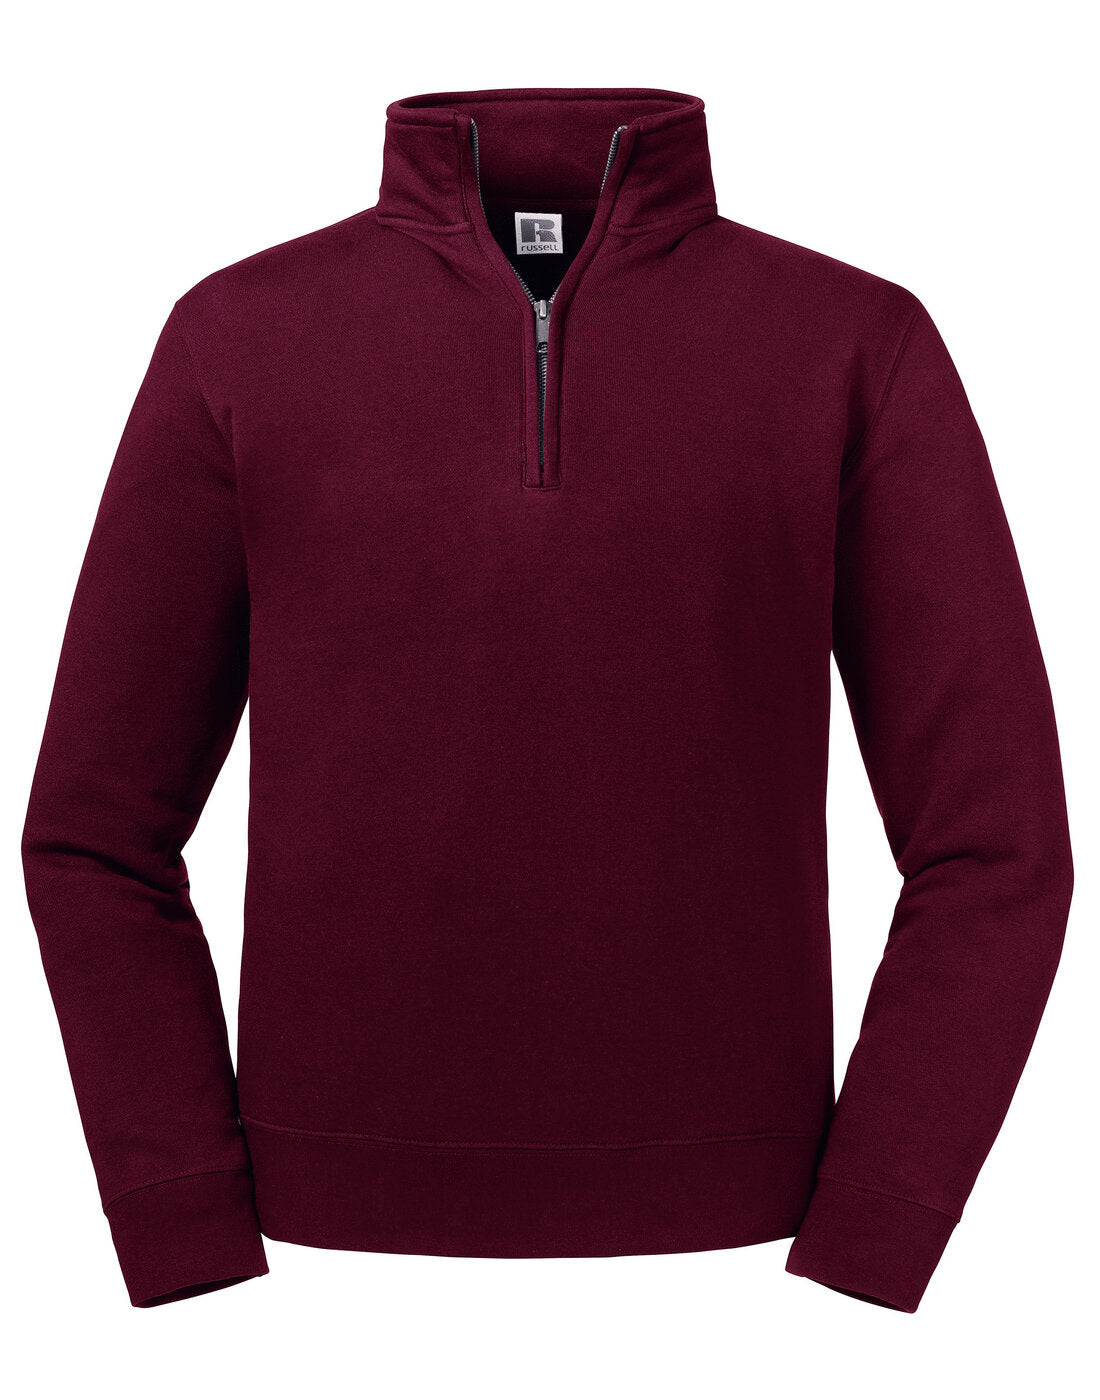 Russell Authentic 1/4 Zip Sweat Burgundy